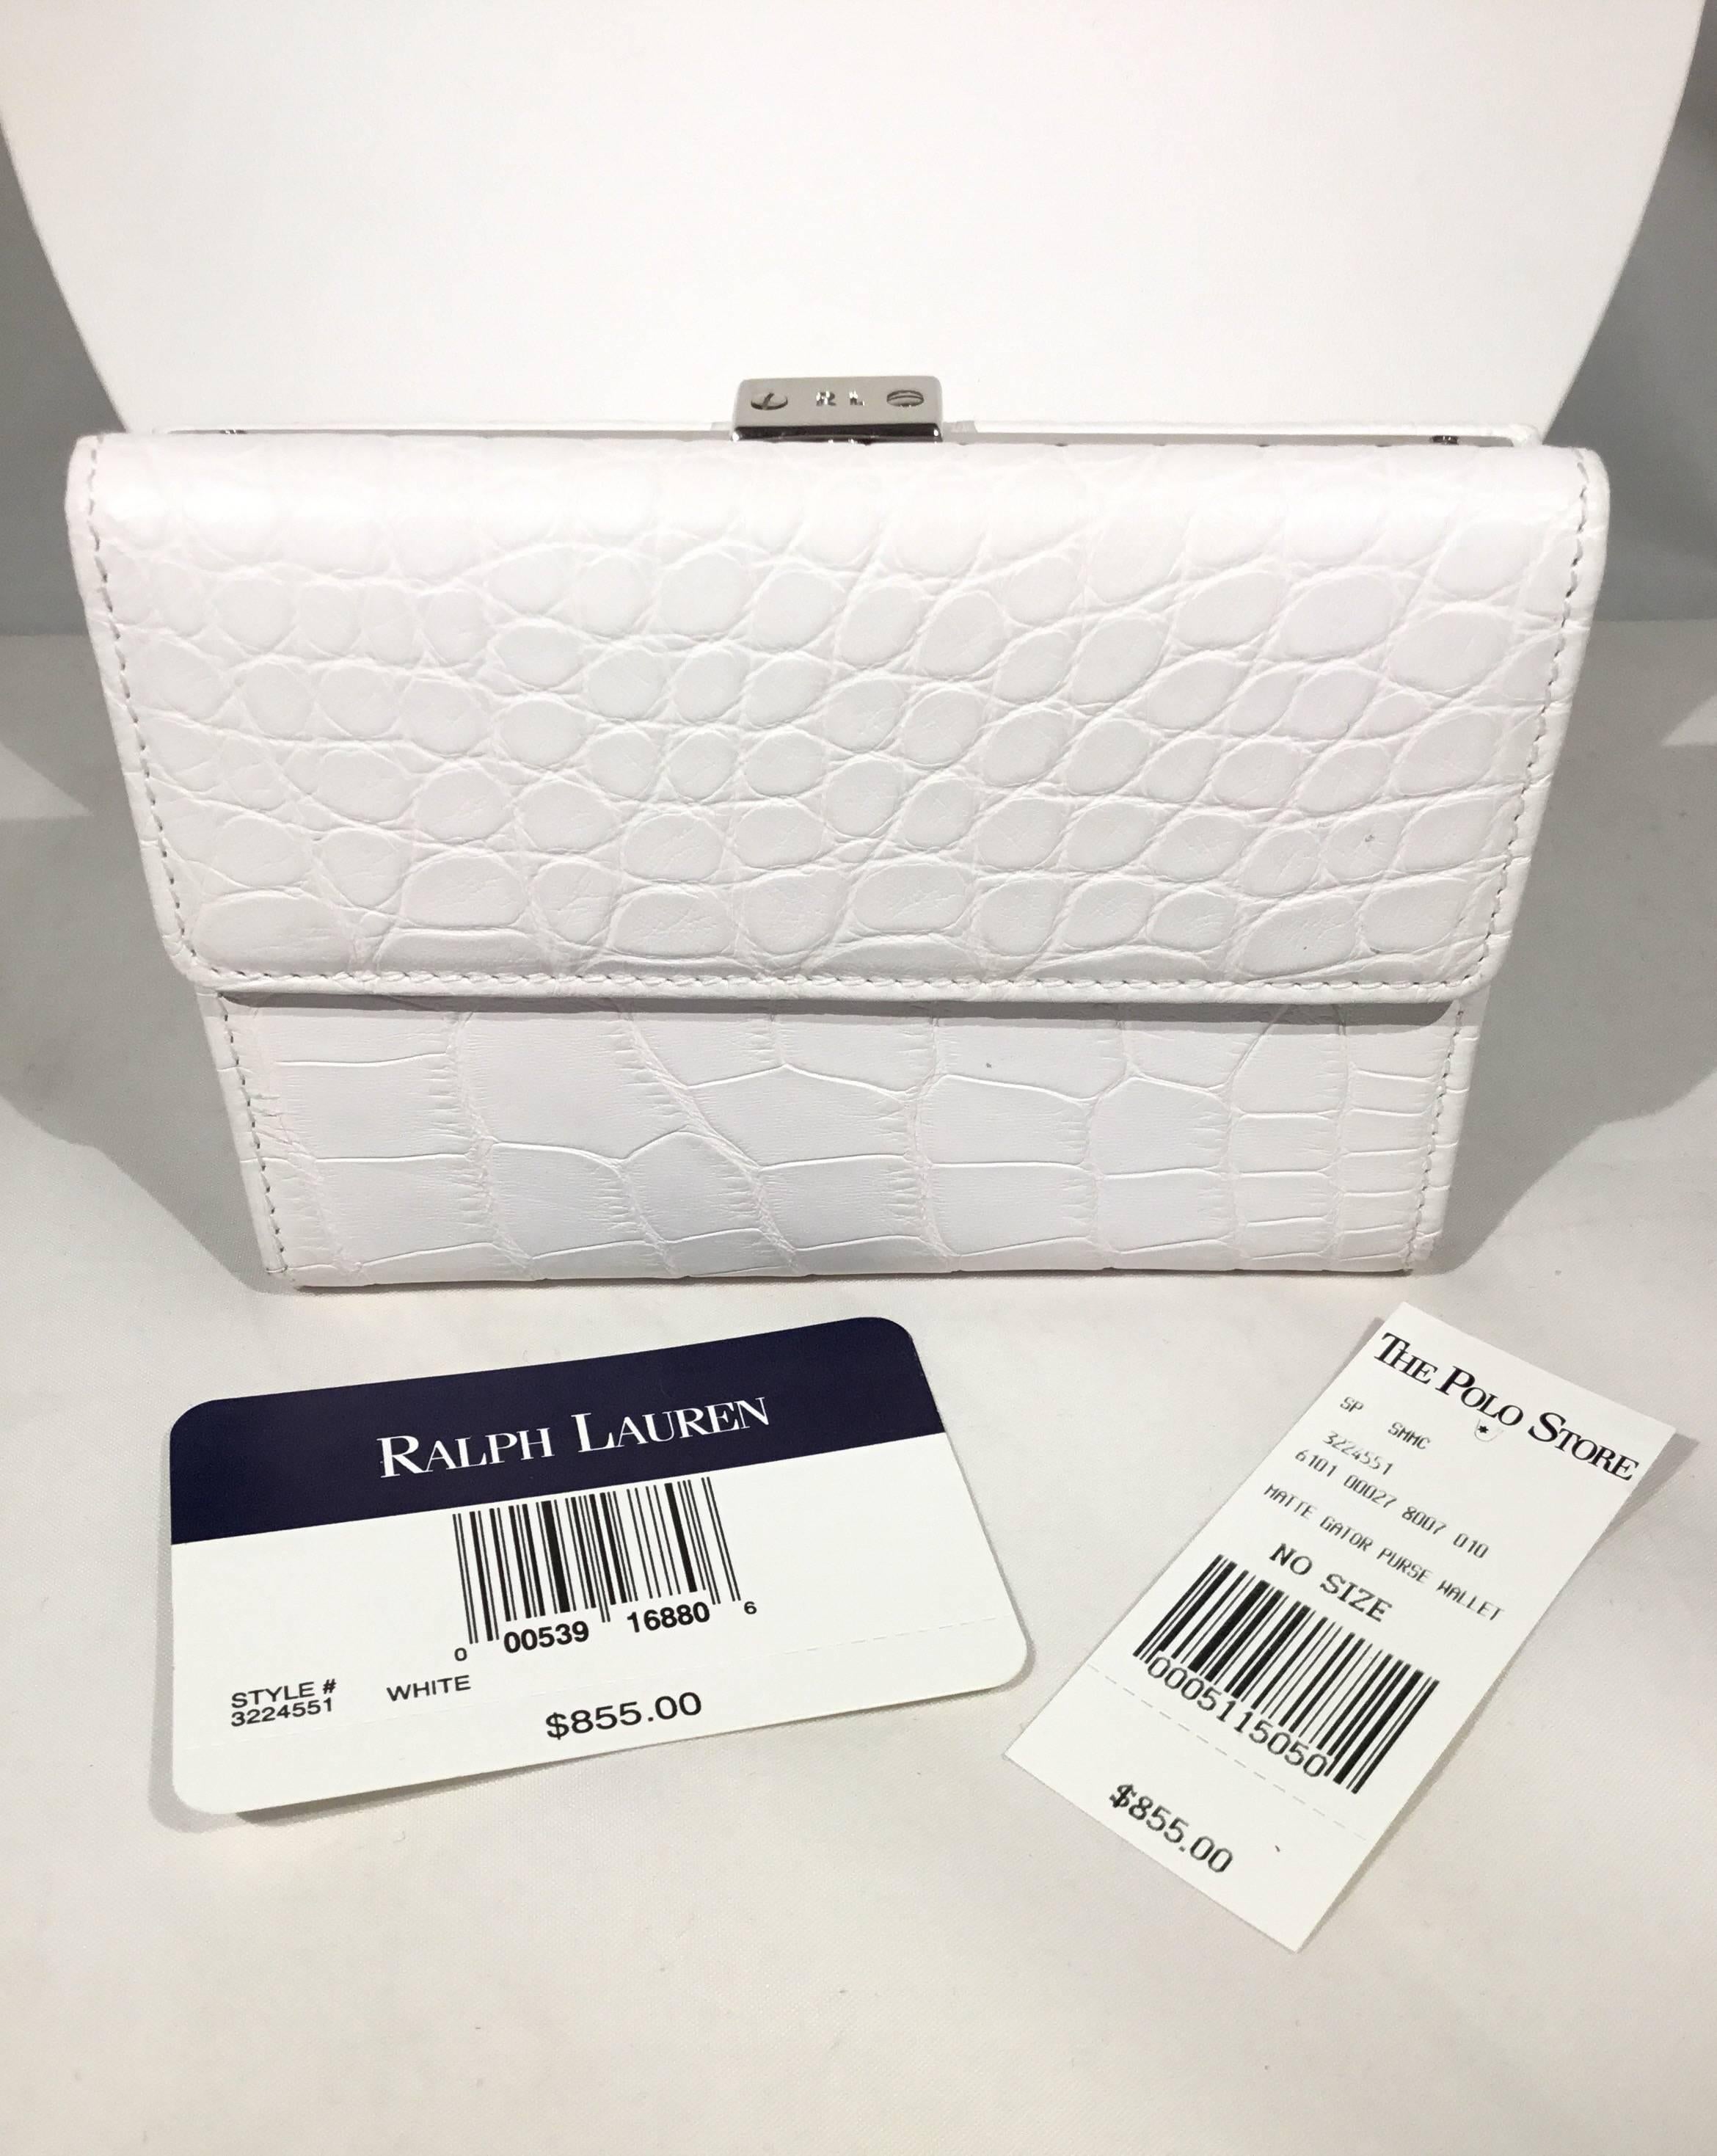 Ralph Lauren Croc Wallet: Smaller purses require smaller wallets.

• matte white crocodile wallet

• Snap flap opening with 6 credit card slots, 4 misc slots, and a slot for bills.

• Silver tone metal closure for coin slot

• Retail $855

• 5” x 1”